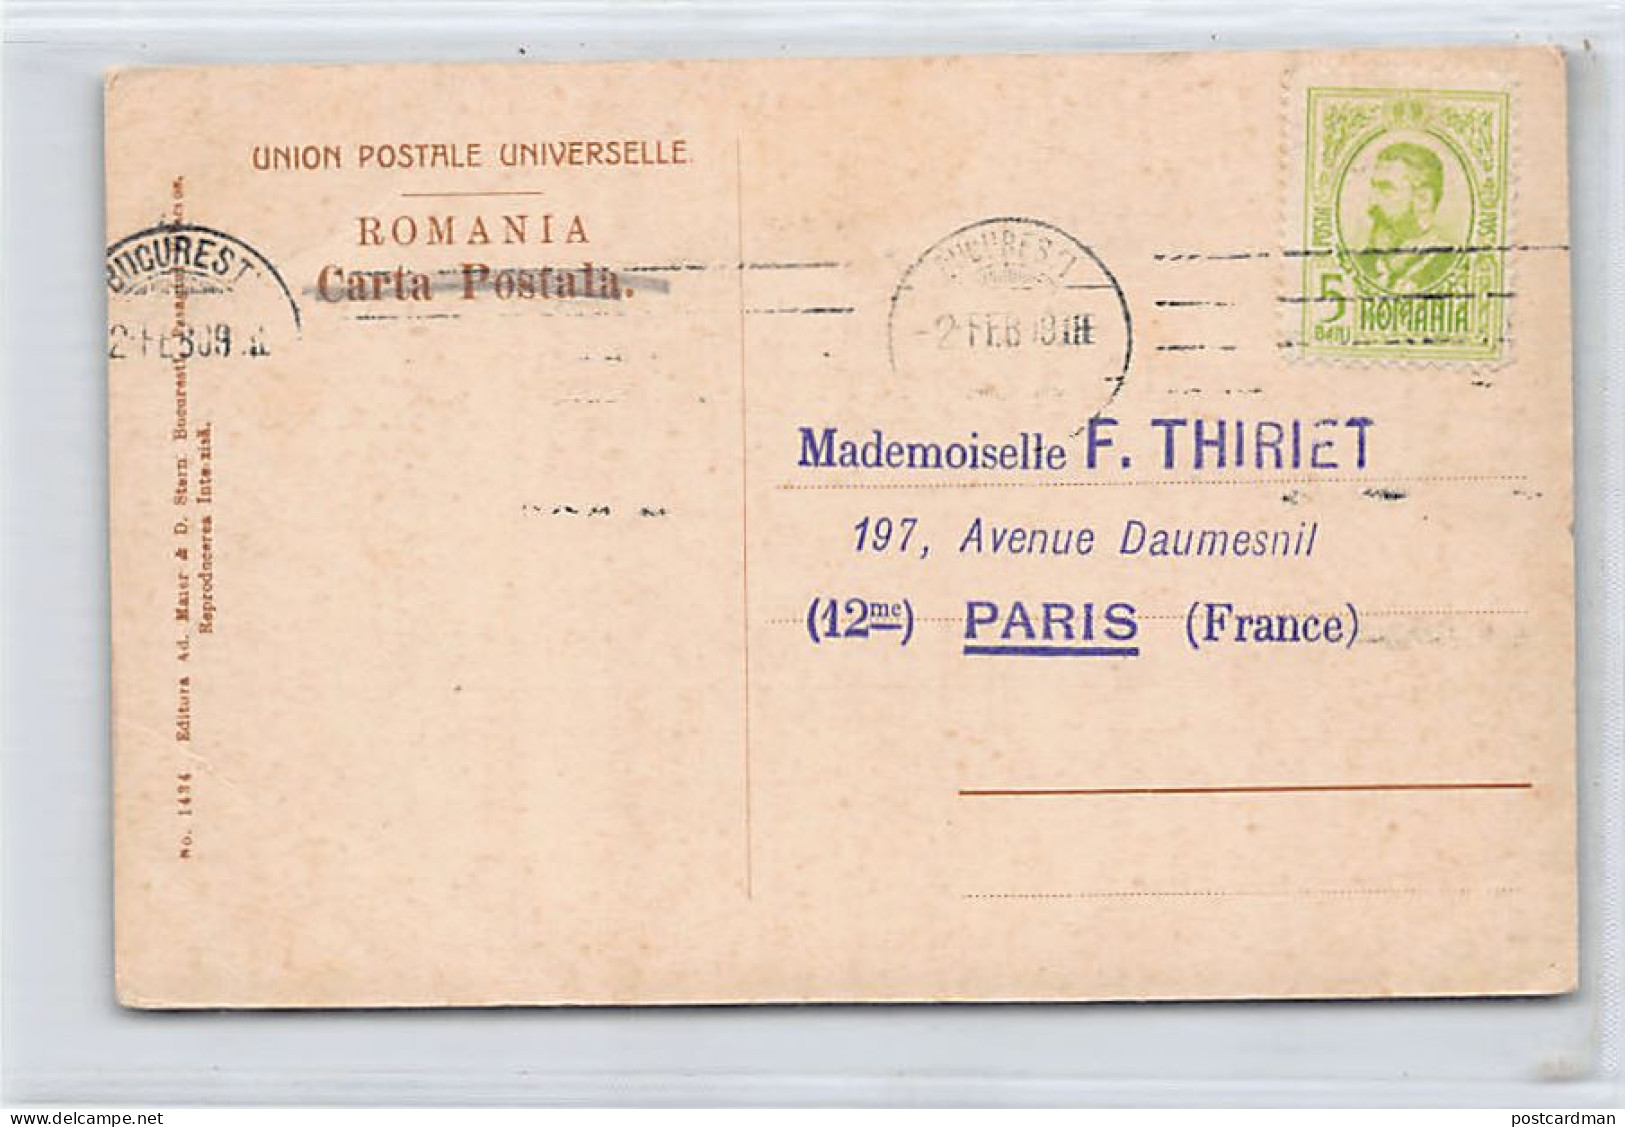 Romania - BUCUREȘTI - Atheneul Roman - SEE SCANS FOR CONDITION - Ed. Ad. Maier & D. Stern 1434 - Romania